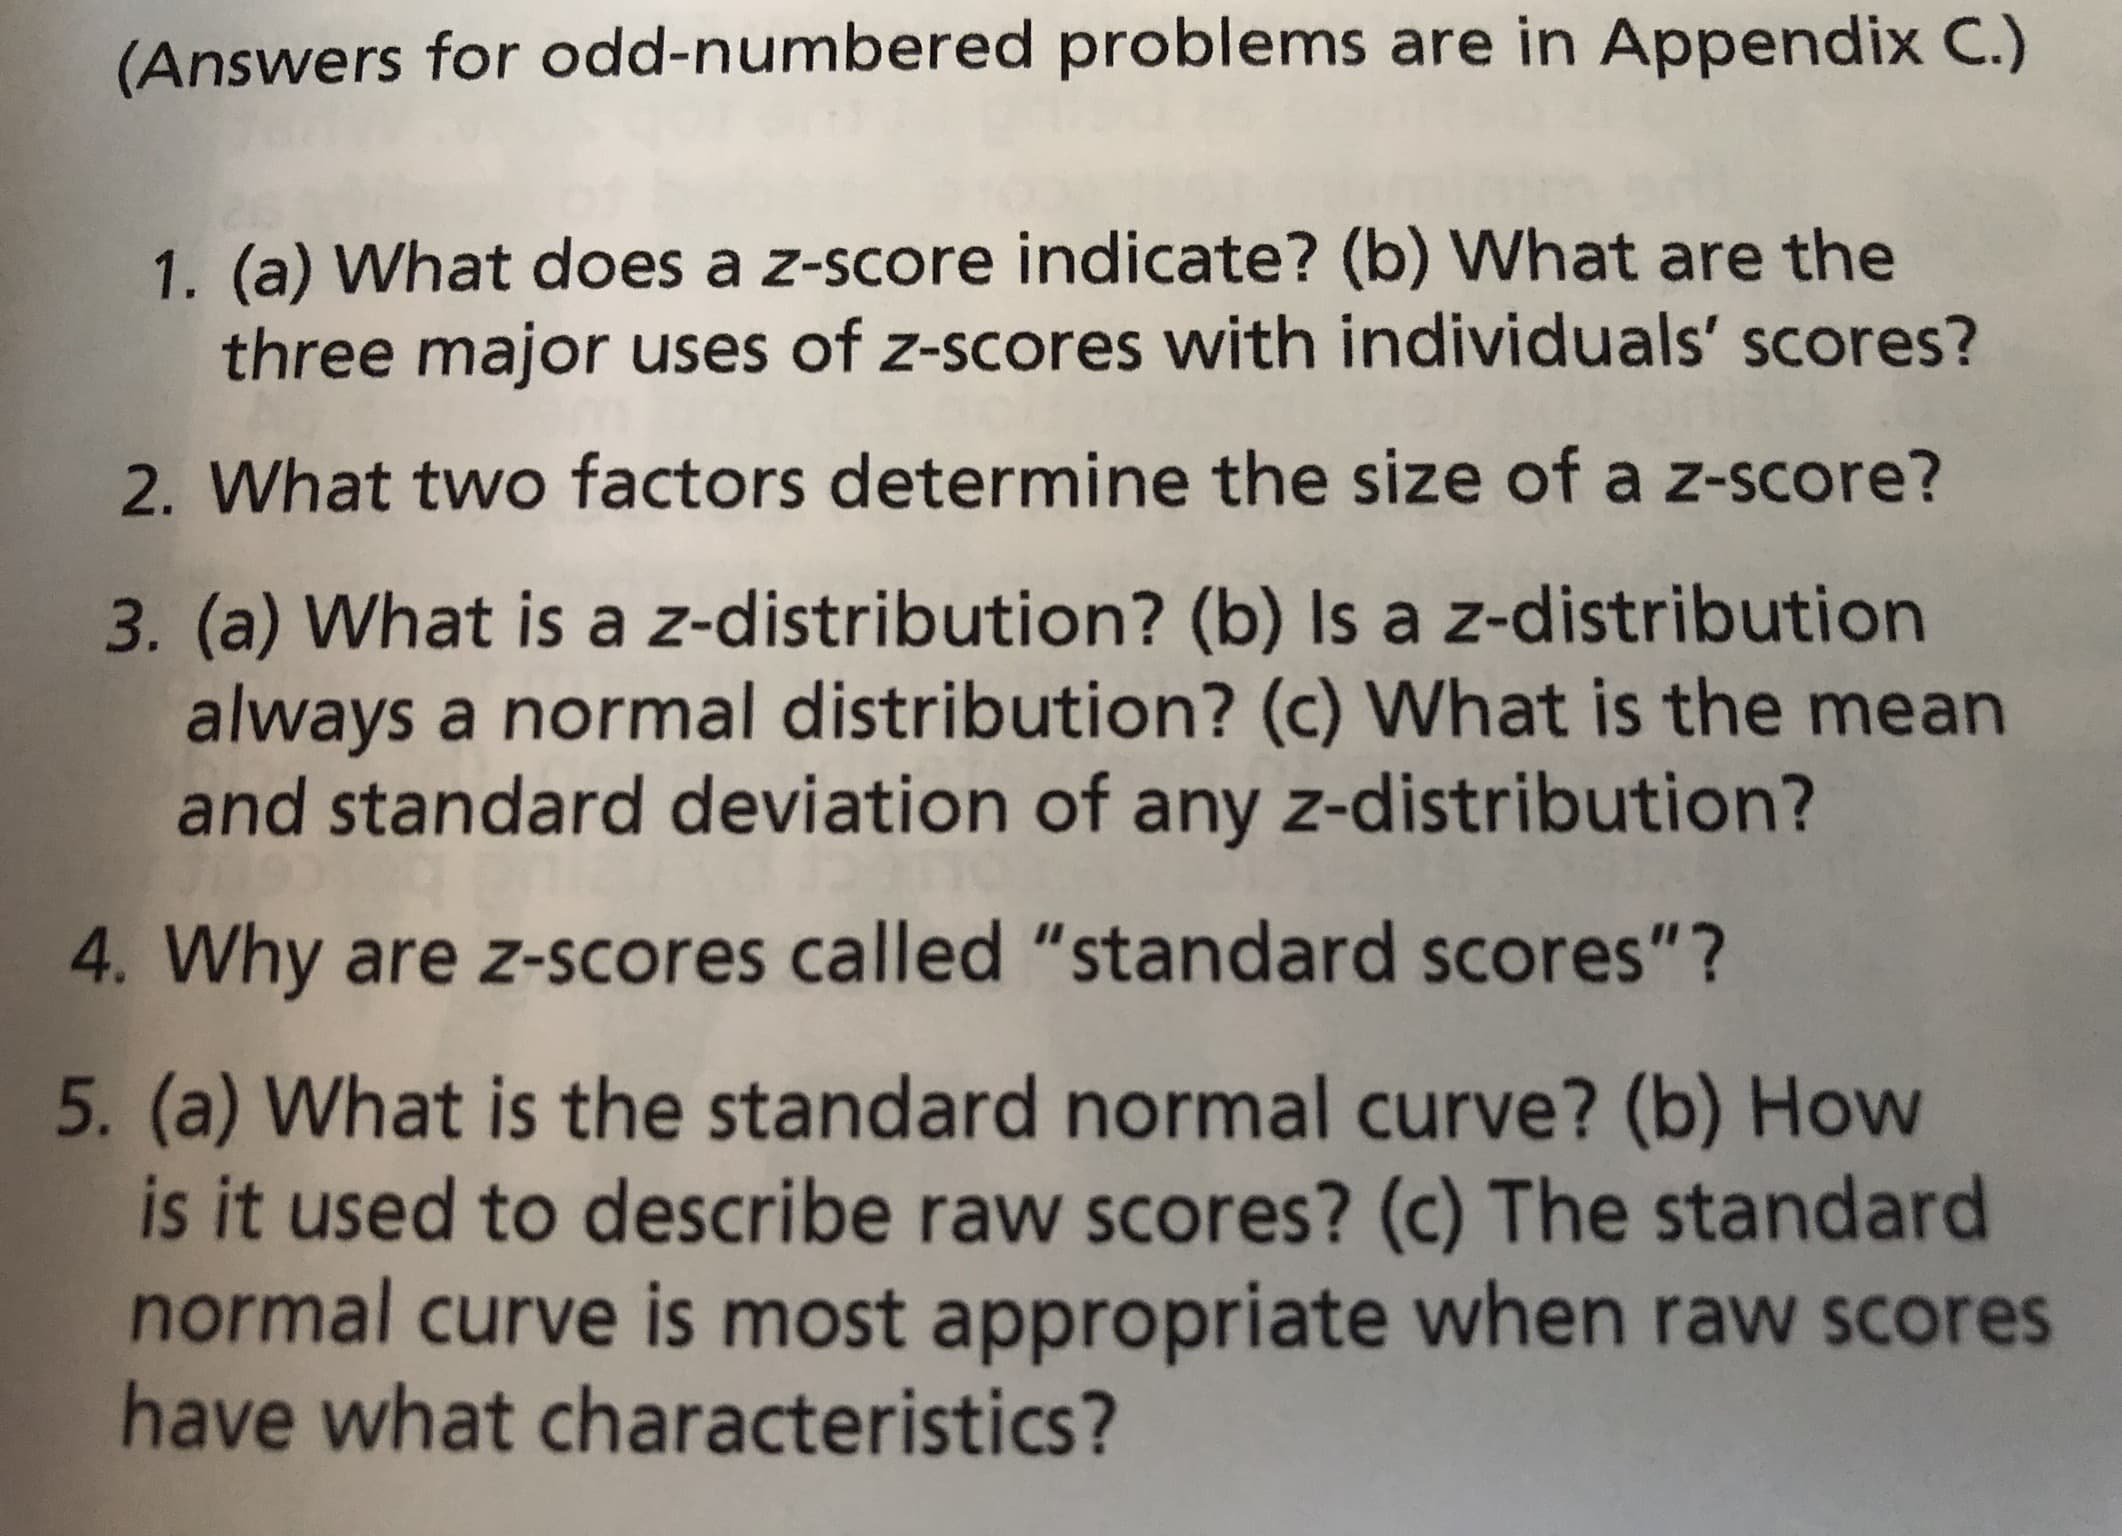 (Answers for odd-numbered problems are in Appendix C.)
1. (a) What does a z-score indicate? (b) What are the
three major uses of z-scores with individuals' scores?
2. What two factors determine the size of a z-score?
3. (a) What is a z-distribution? (b) Is a z-distribution
always a normal distribution? (c) What is the mean
and standard deviation of any z-distribution?
4. Why are z-scores called "standard scores"?
5. (a) What is the standard normal curve? (b) How
is it used to describe raw scores? (c) The standard
normal curve is most appropriate when raw scores
have what characteristics?
